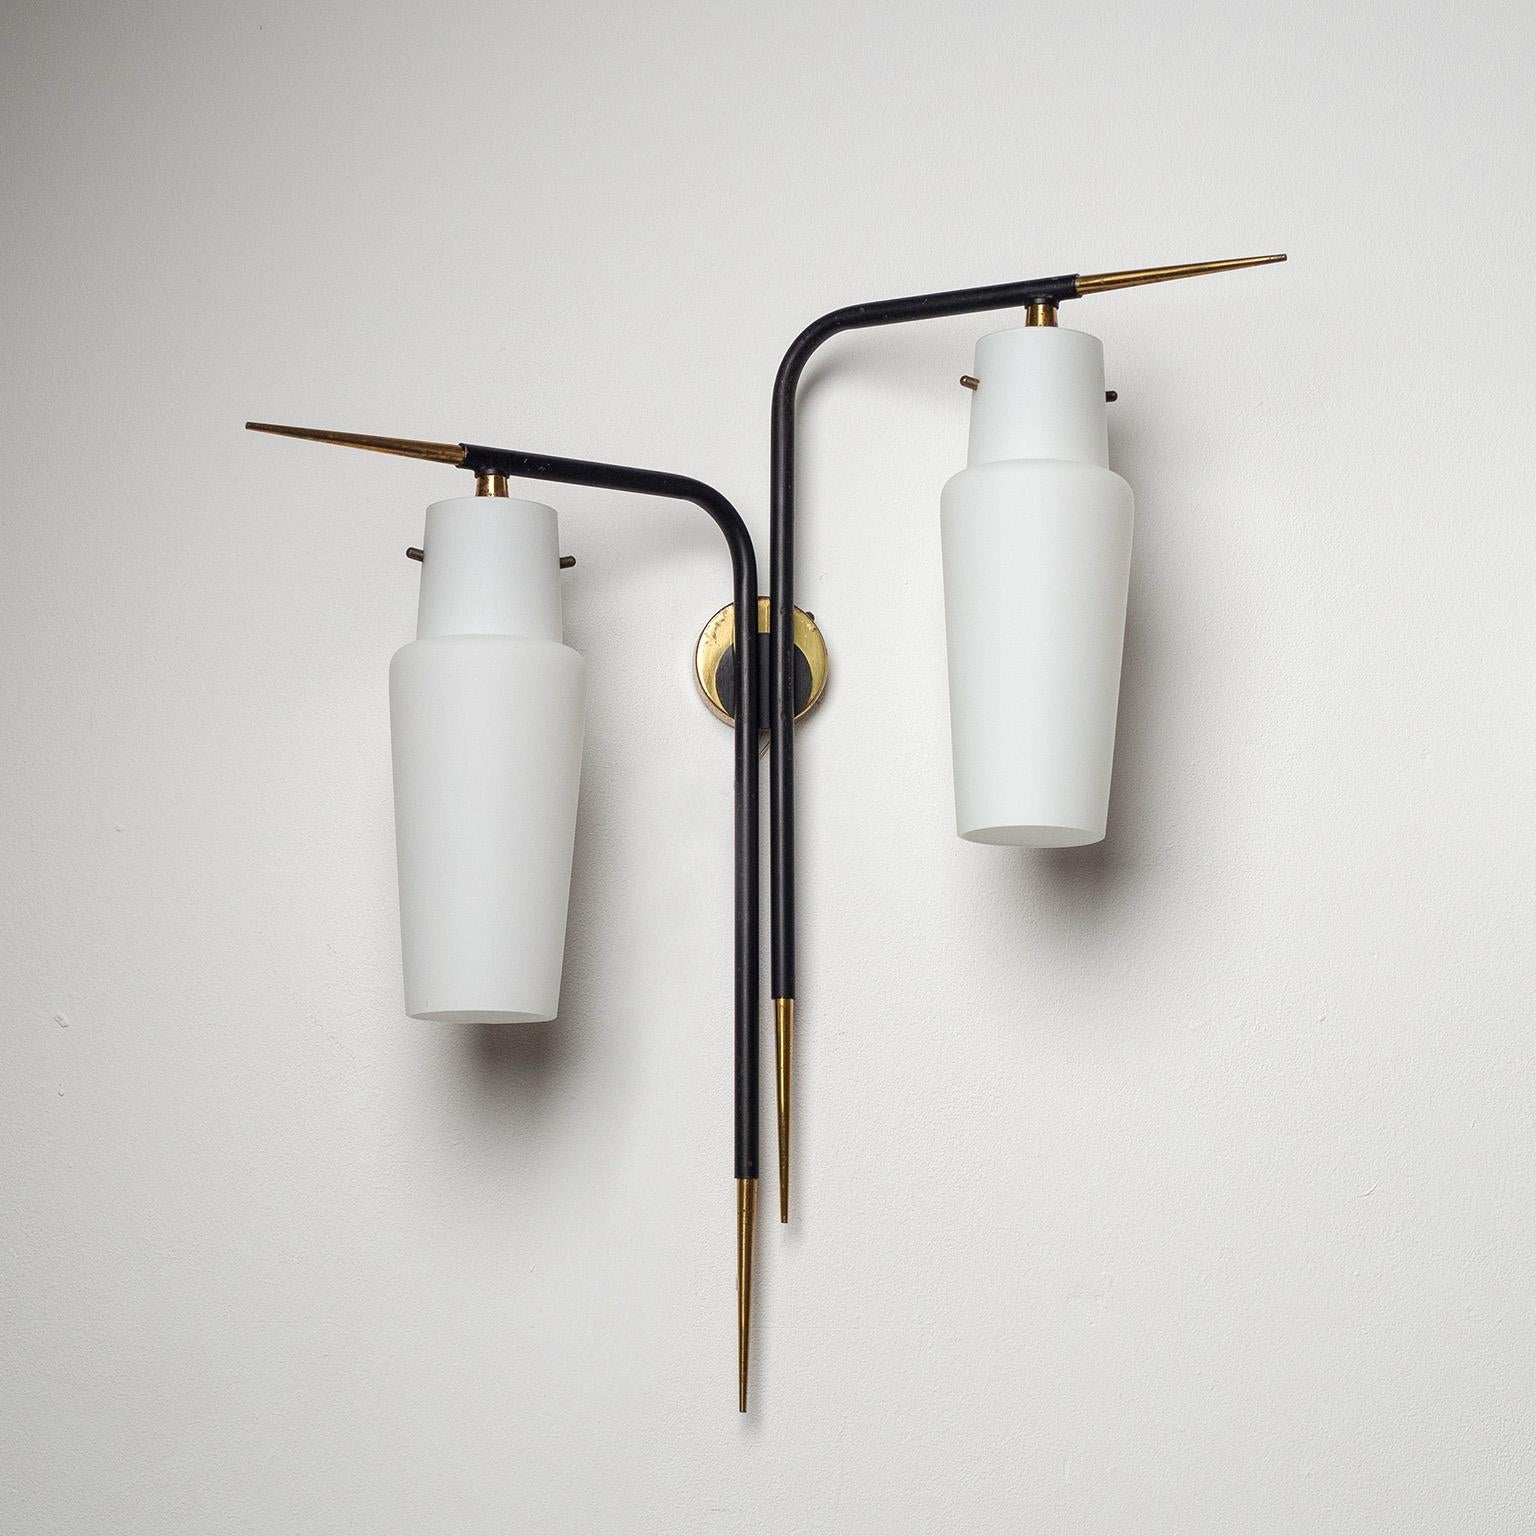 Mid-20th Century Pair of Large French Modernist Wall Lights, 1950s